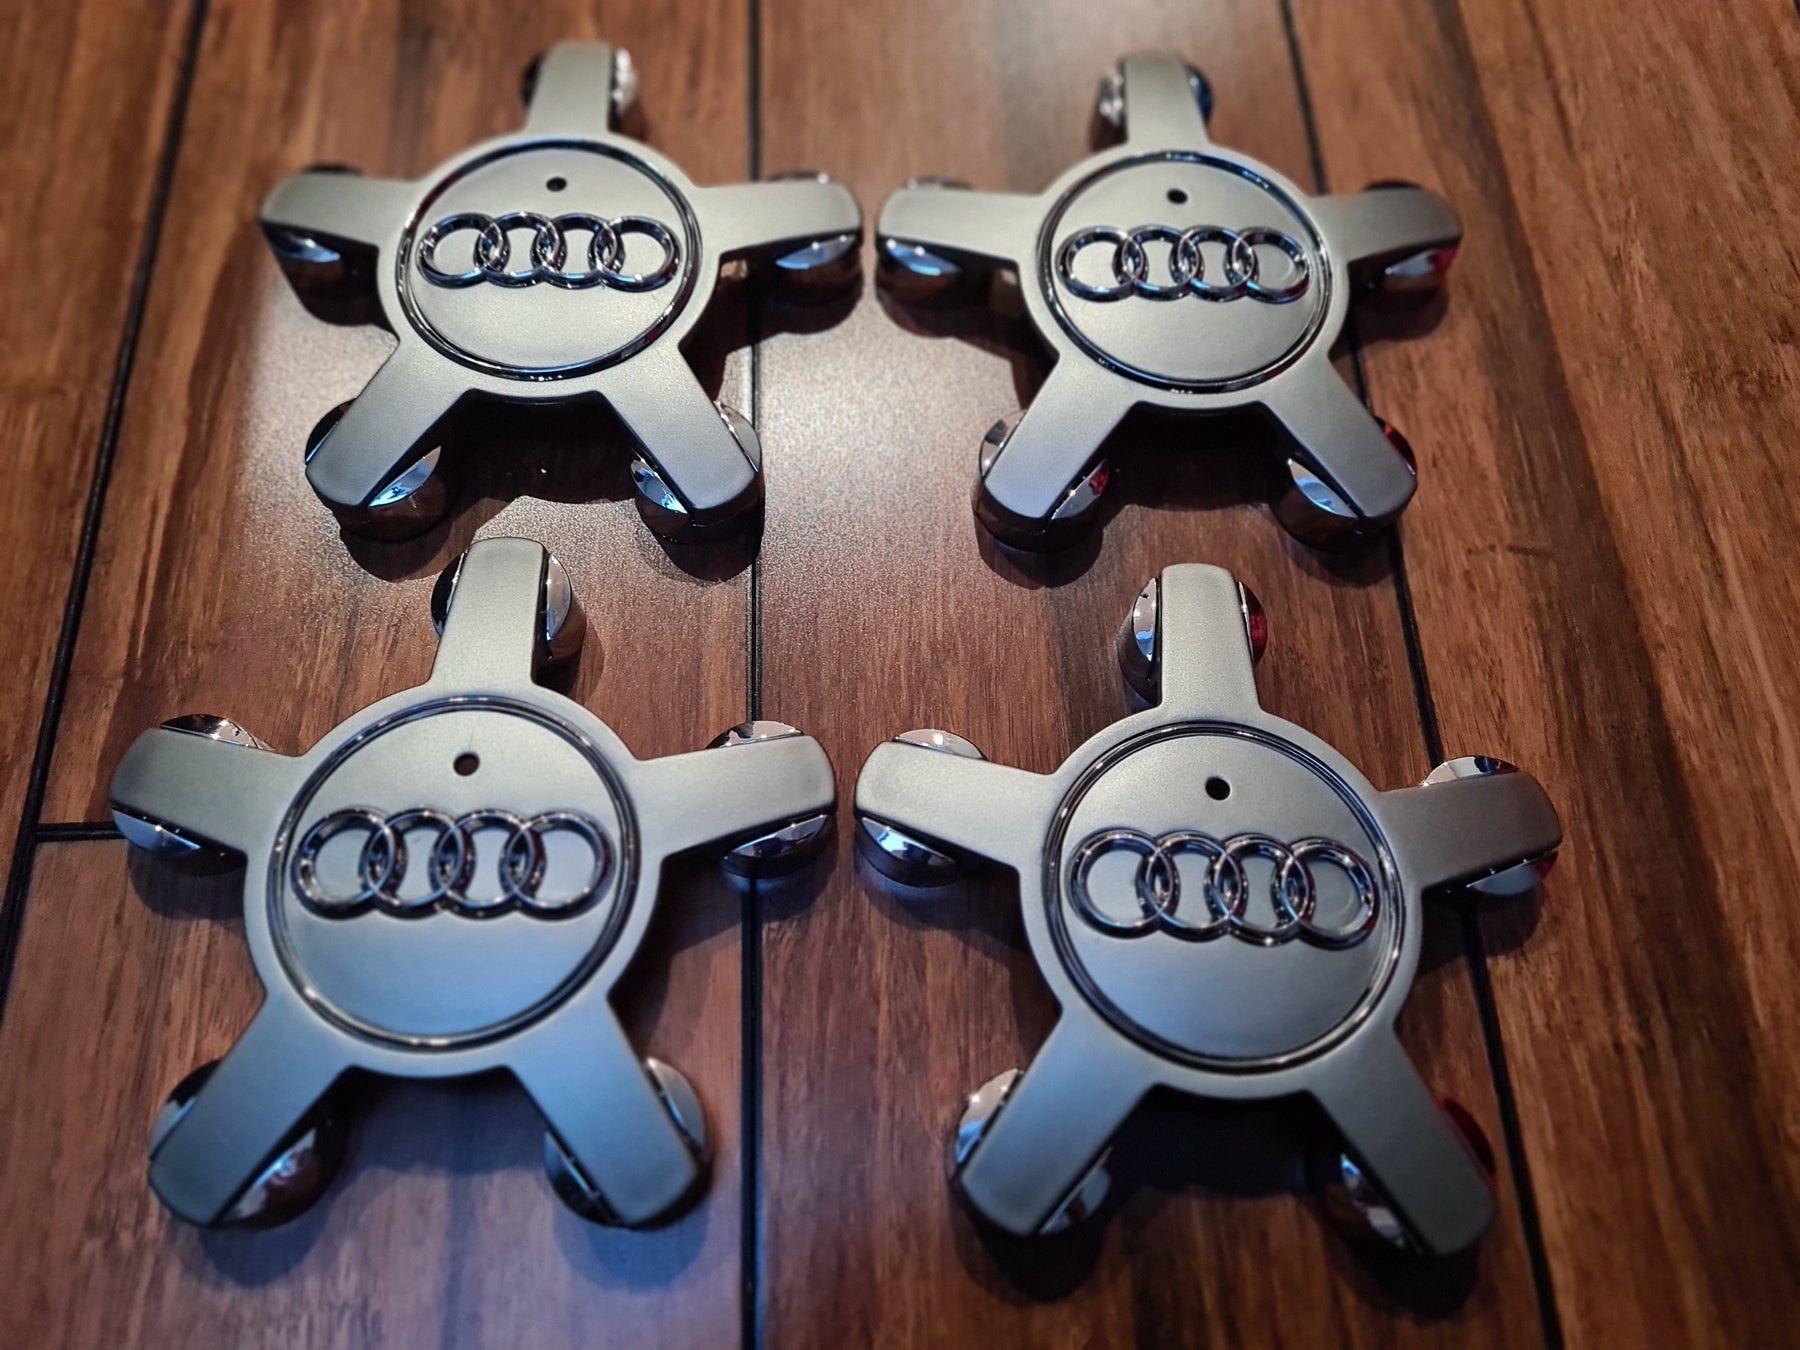 4x Alloy Wheel Star Spider Centre Caps for Audi A3, A4, A6 models